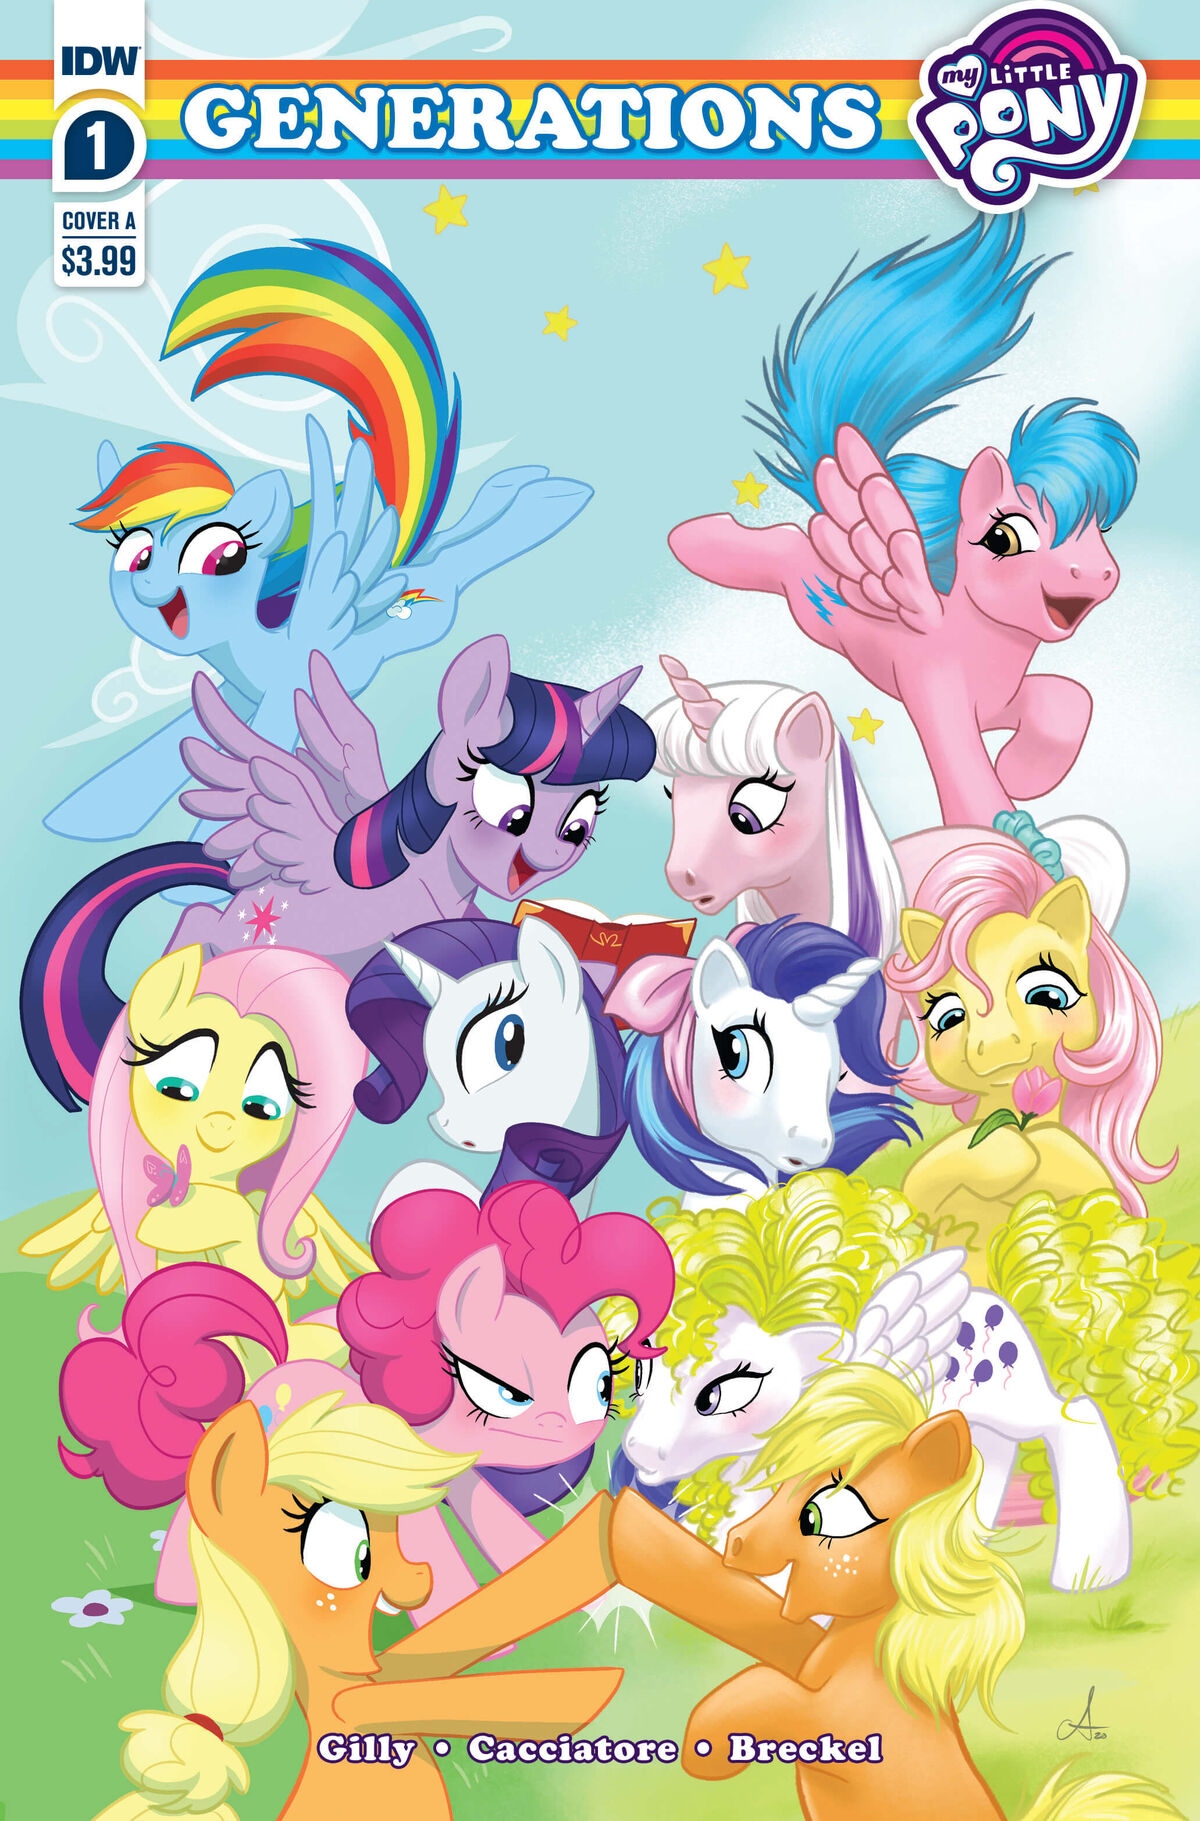 mlp g1 characters